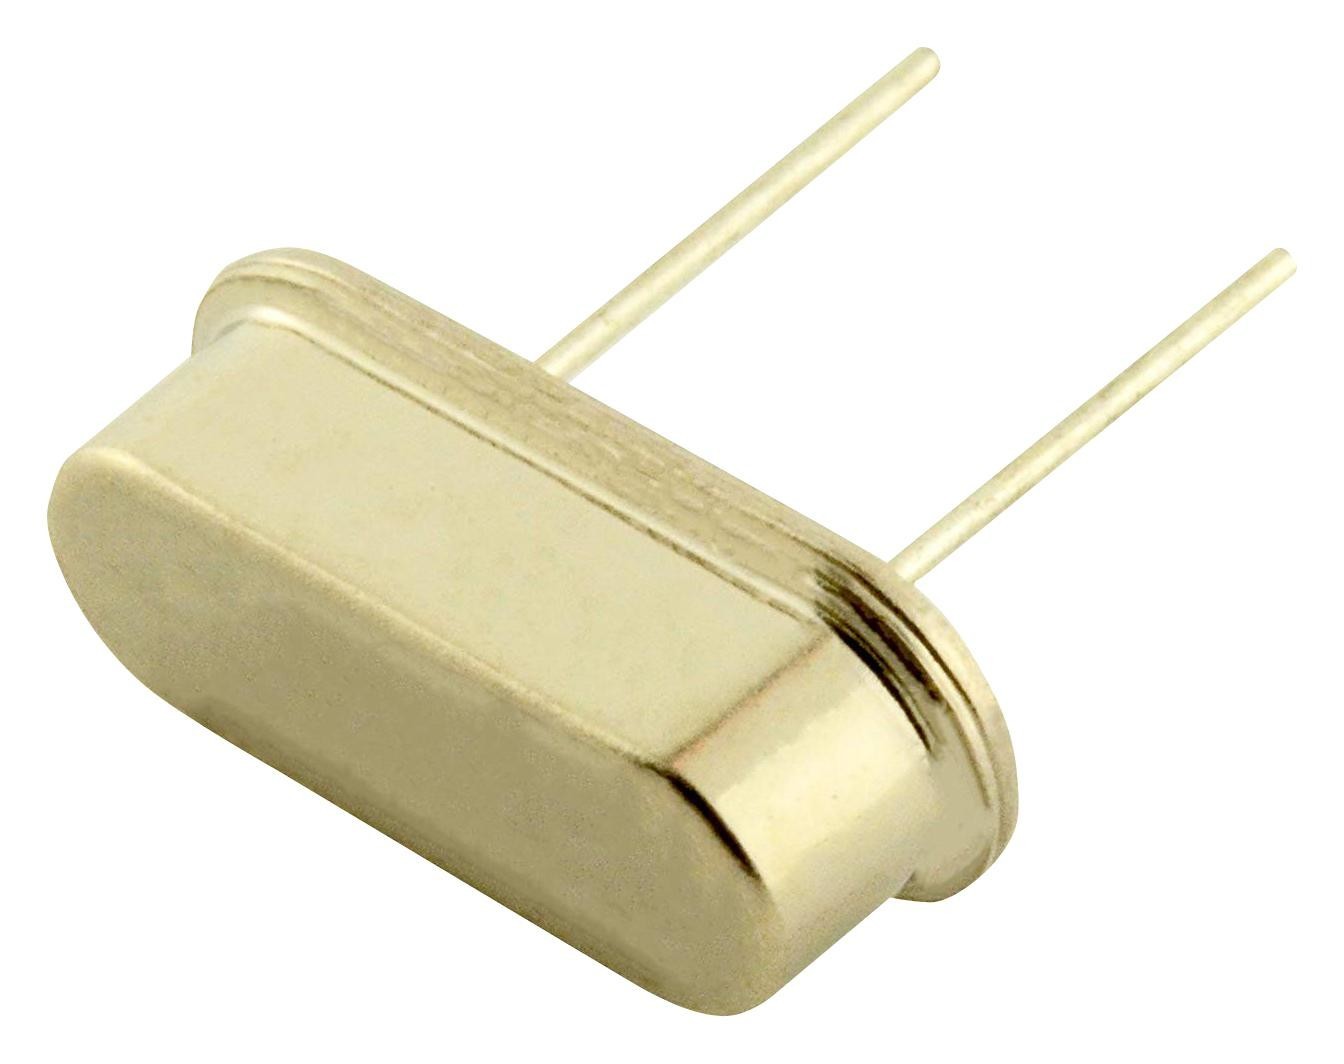 Raltron As-16.000-20-Ext Crystal, 16Mhz, 20Pf, 11.35mm X 5mm